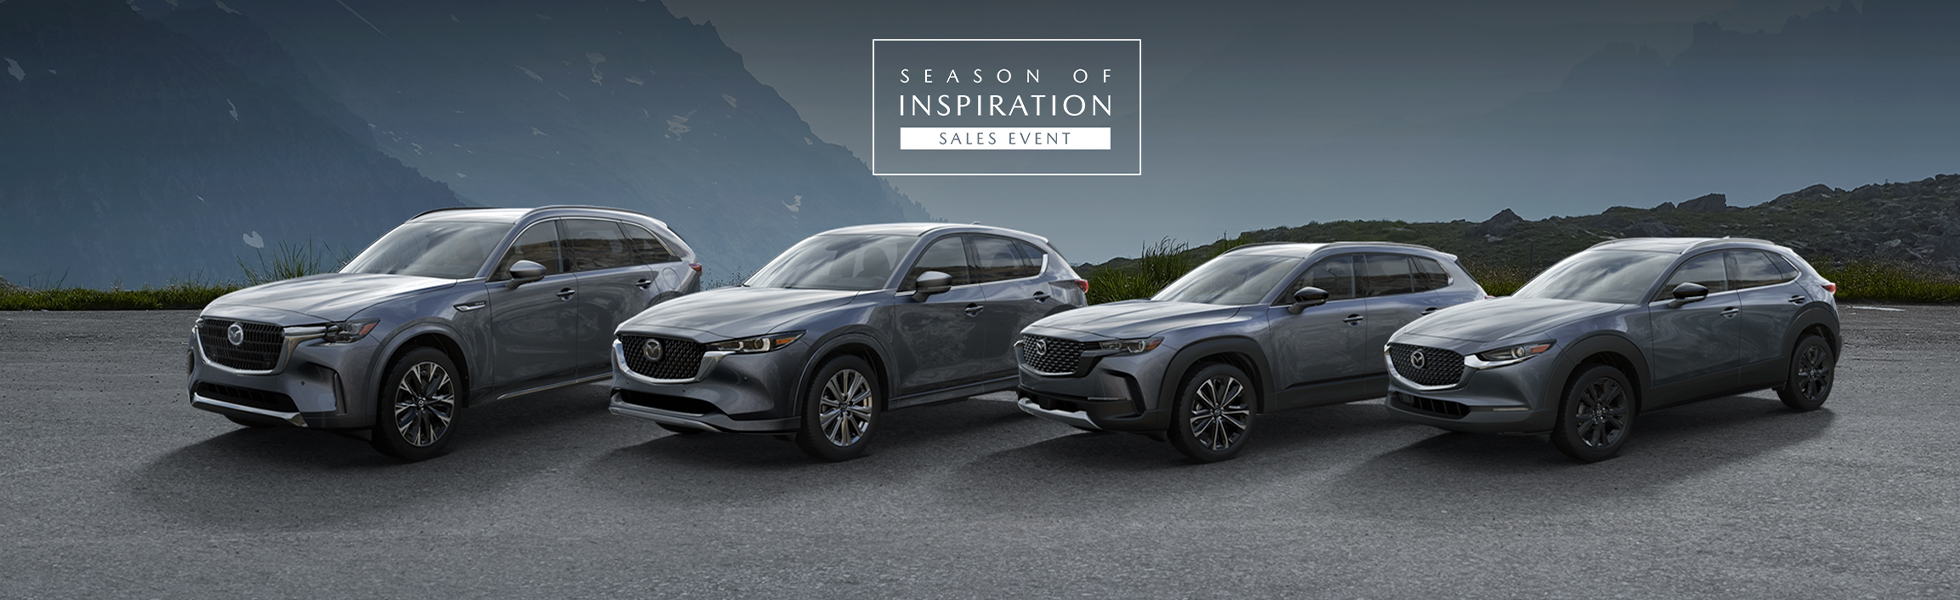 Season of Inspiration Sales Event banner featuring Mazda lineup